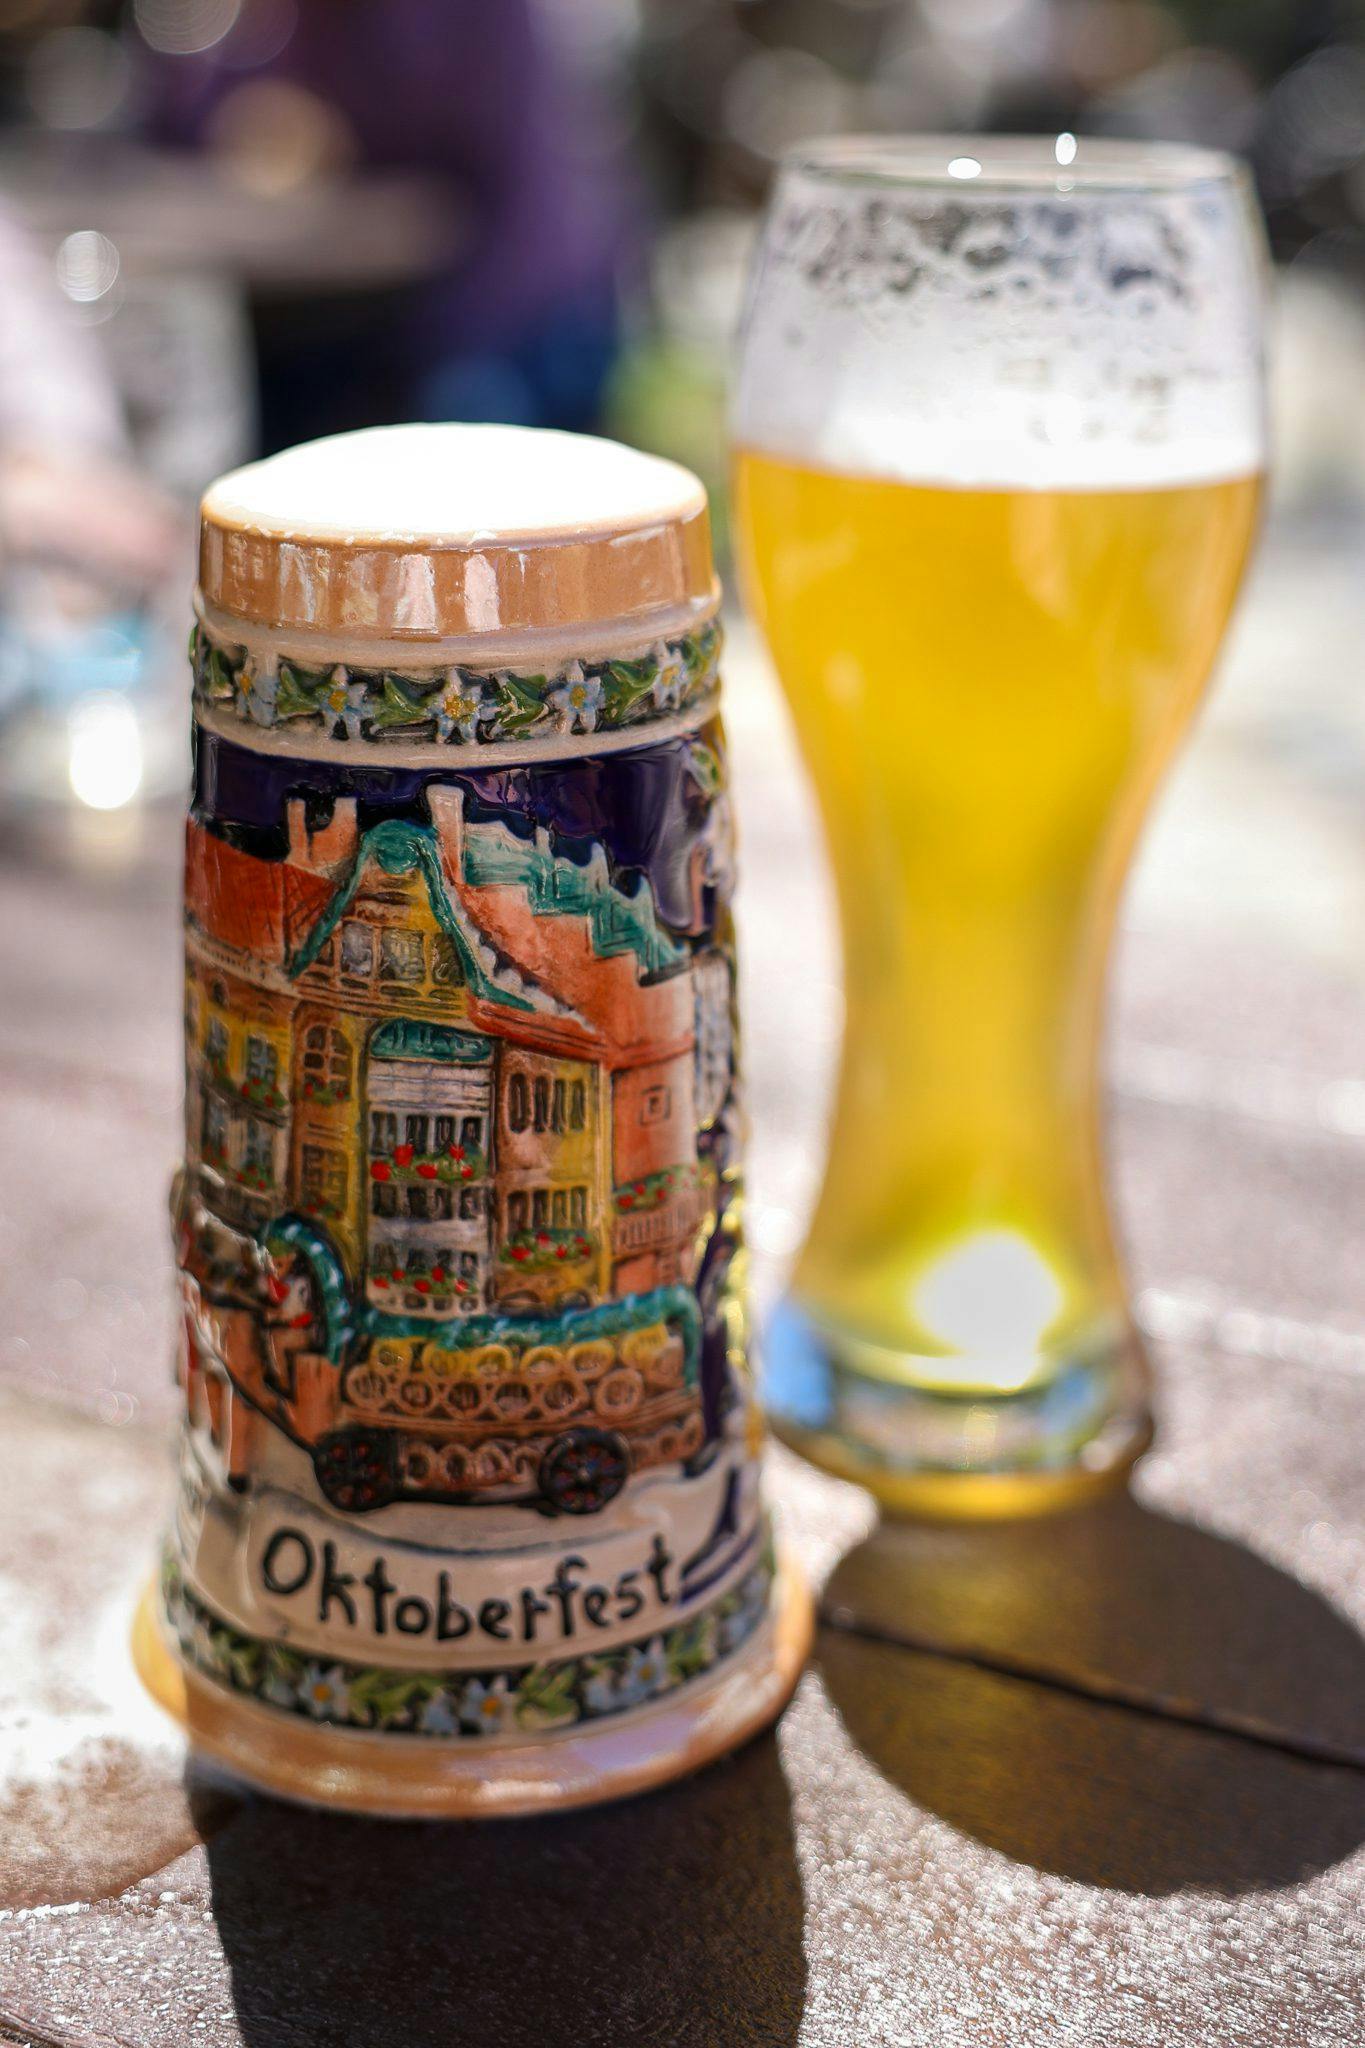 Oktoberfest beer in pint glass and stein on table outside